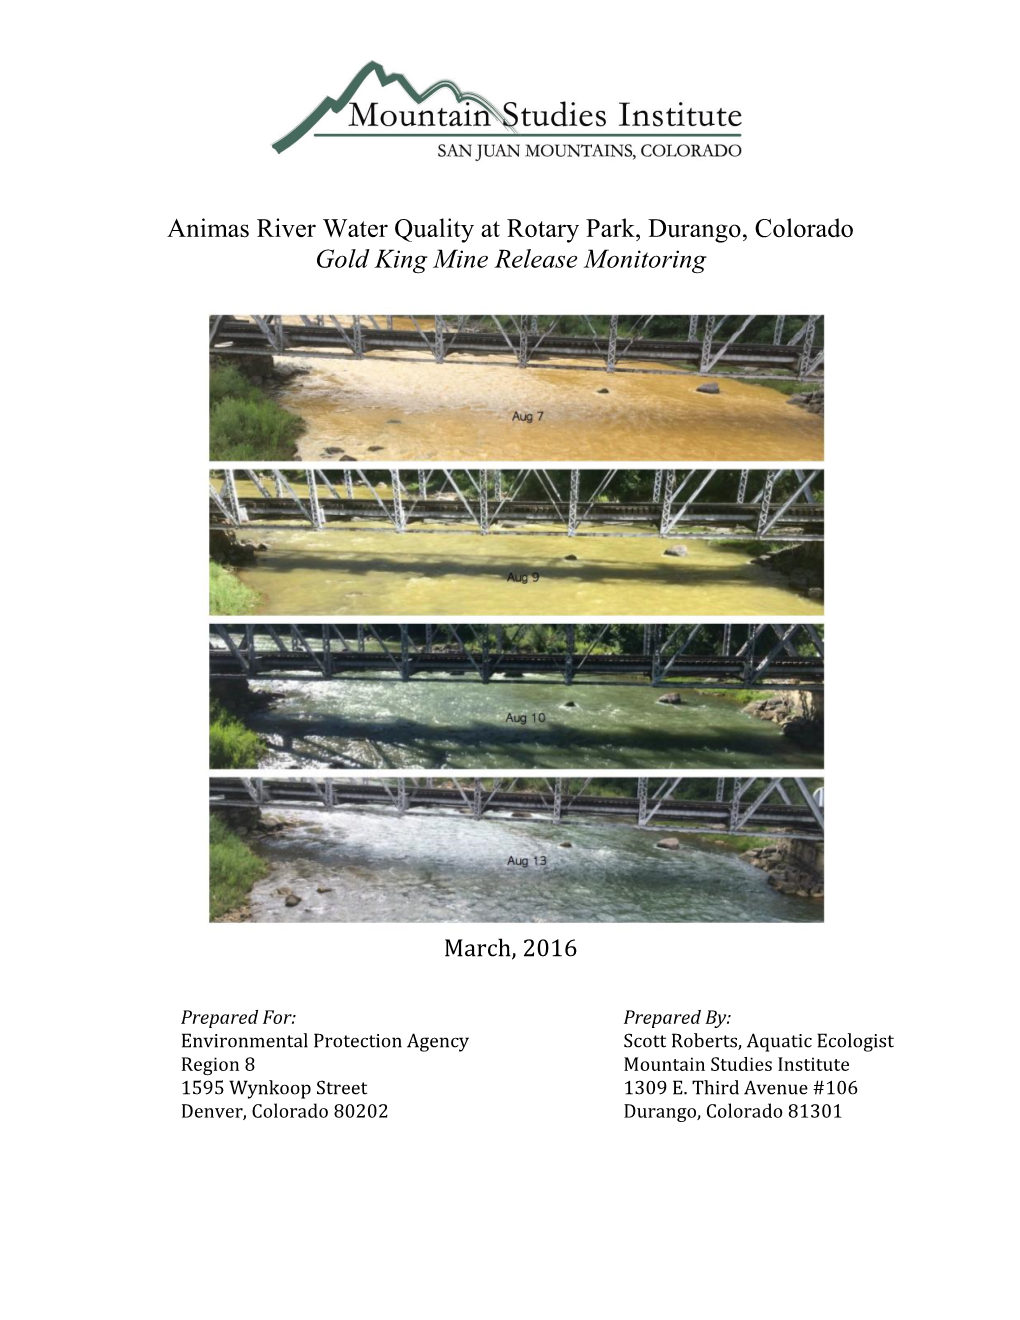 Animas River Water Quality at Rotary Park, Durango, Colorado Gold King Mine Release Monitoring